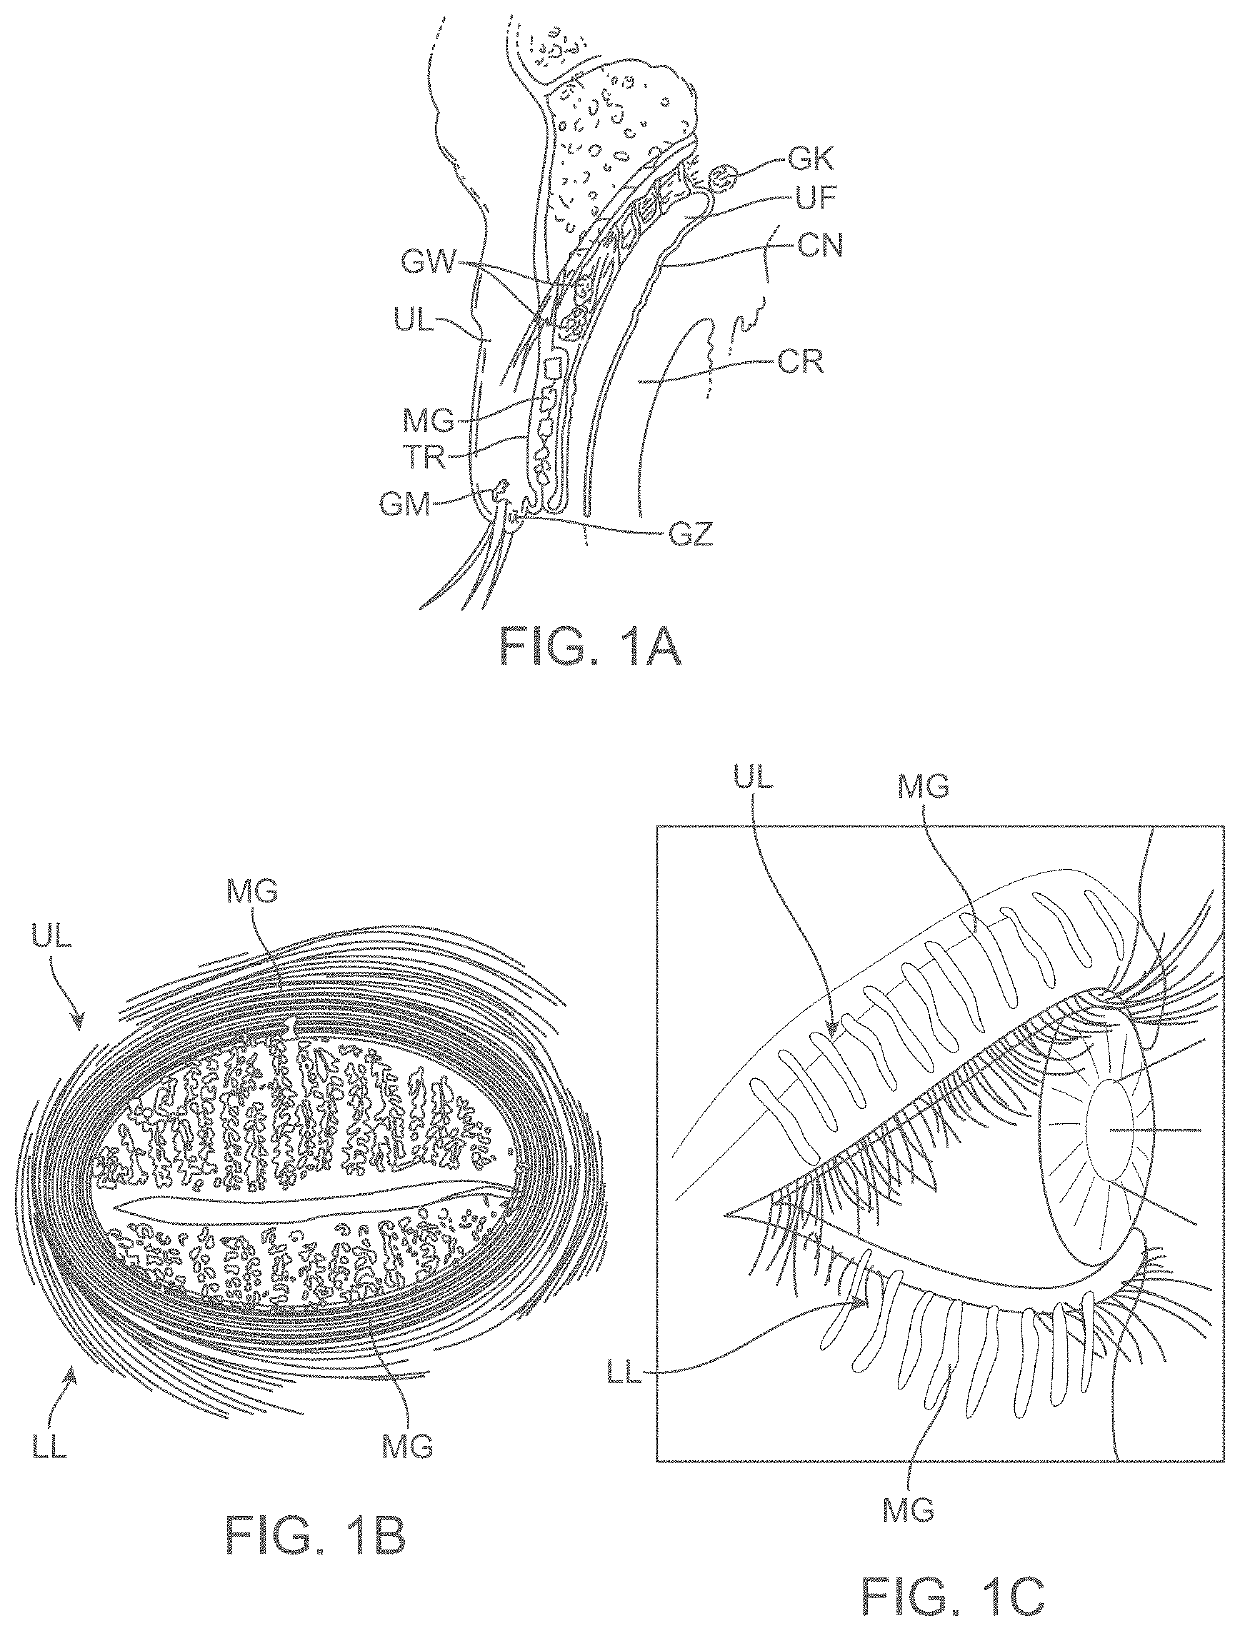 Controller with imaging system